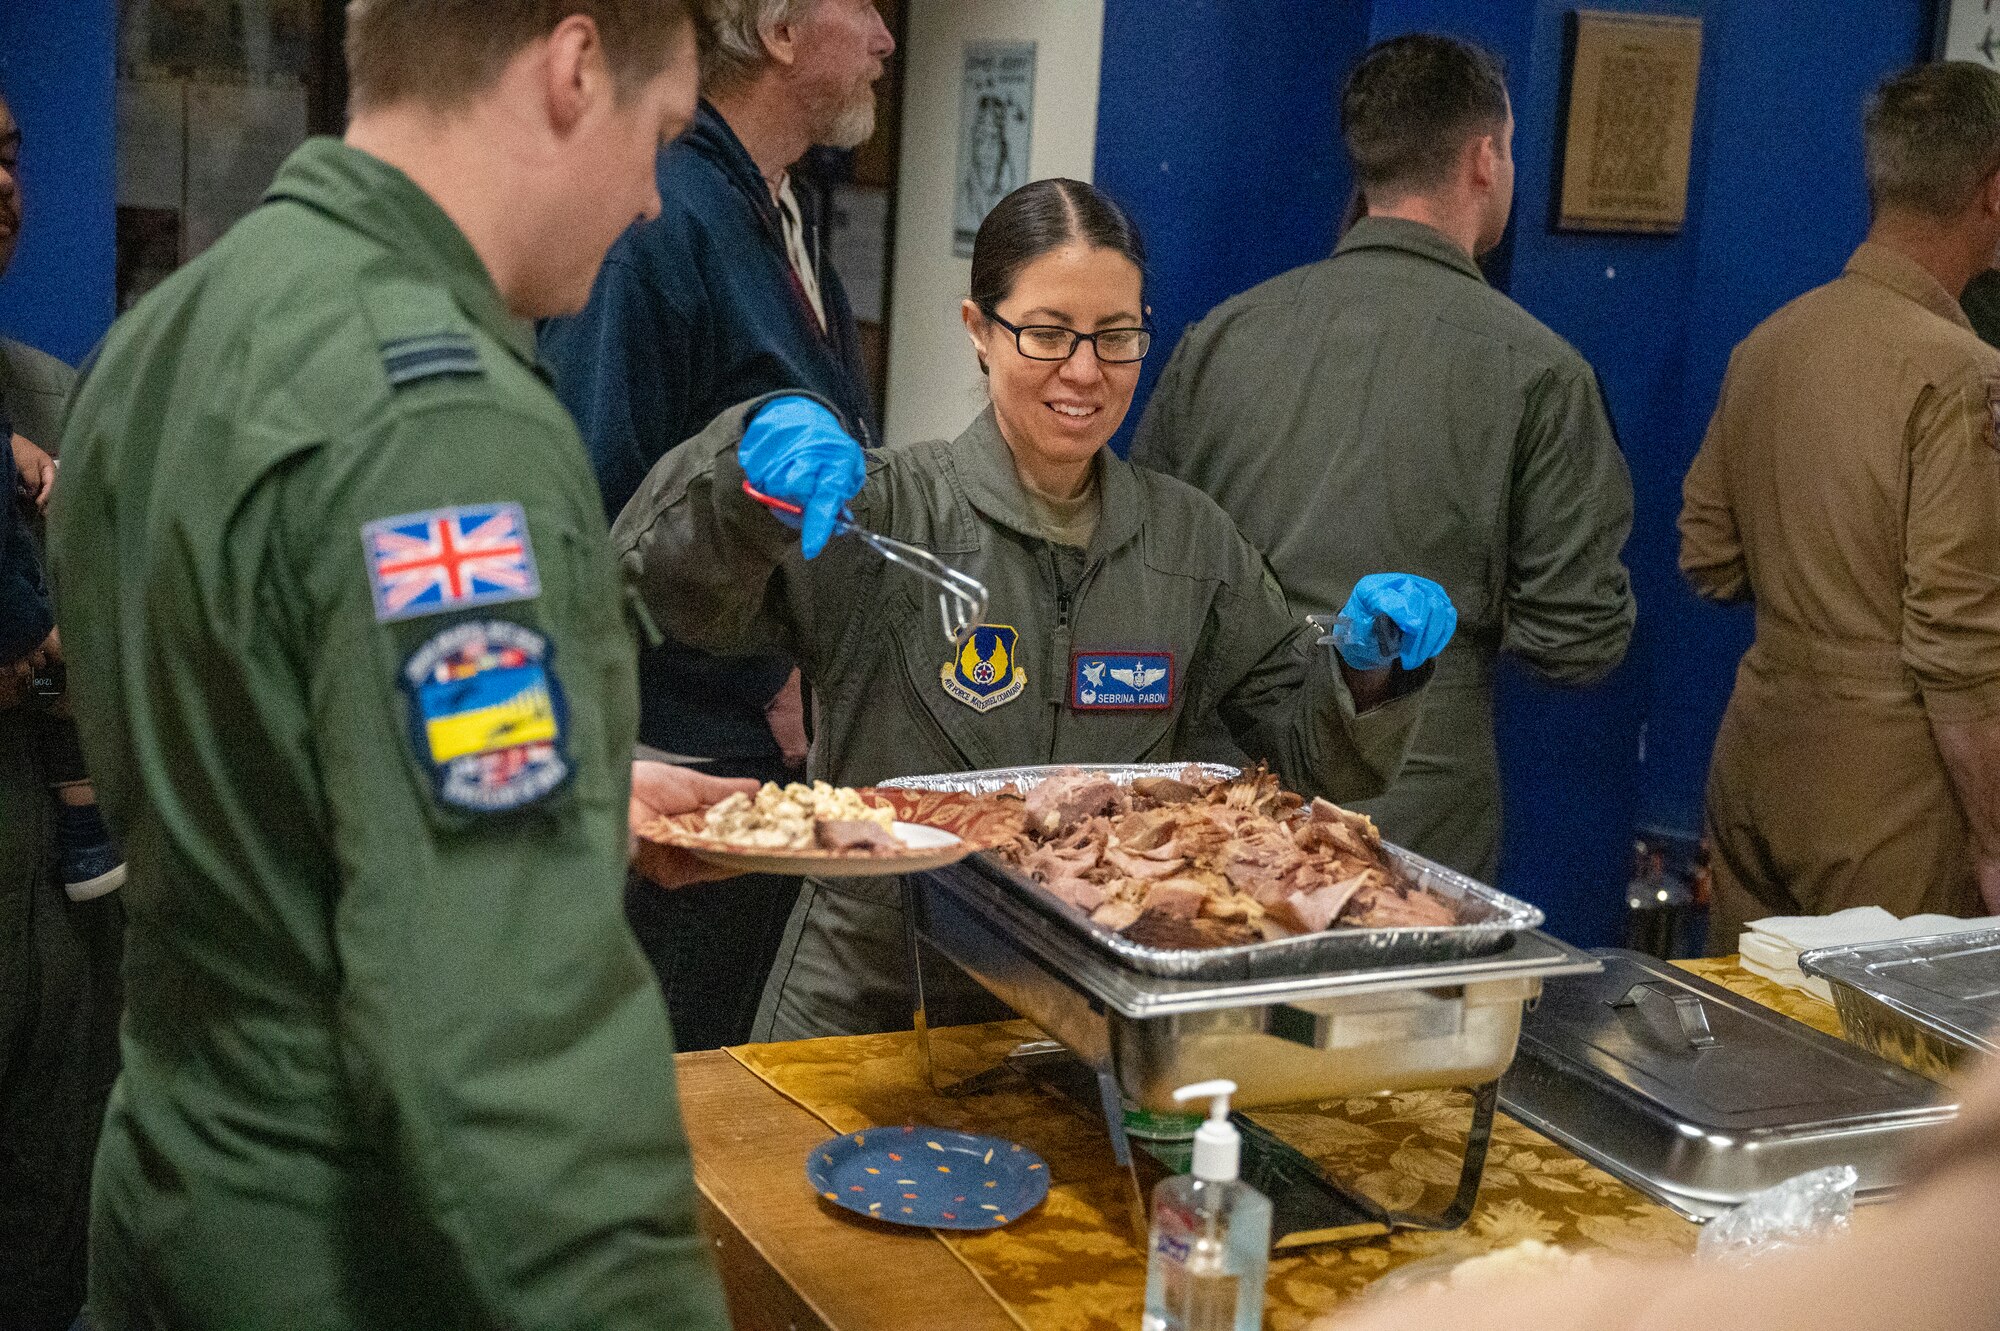 Not to miss out on the upcoming holidays, USAF TPS planned and hosted an American Thanksgiving feast with all the traditional fixings for the ROKAF and USAF TPS team. The culmination of a successful technical exchange, a Thanksgiving meal together was the perfect ending for shared experiences in flight test and cultural traditions. (Pictured: Col. Sebrina Pabon, Commandant, U.S. Air Force Test Pilot School)